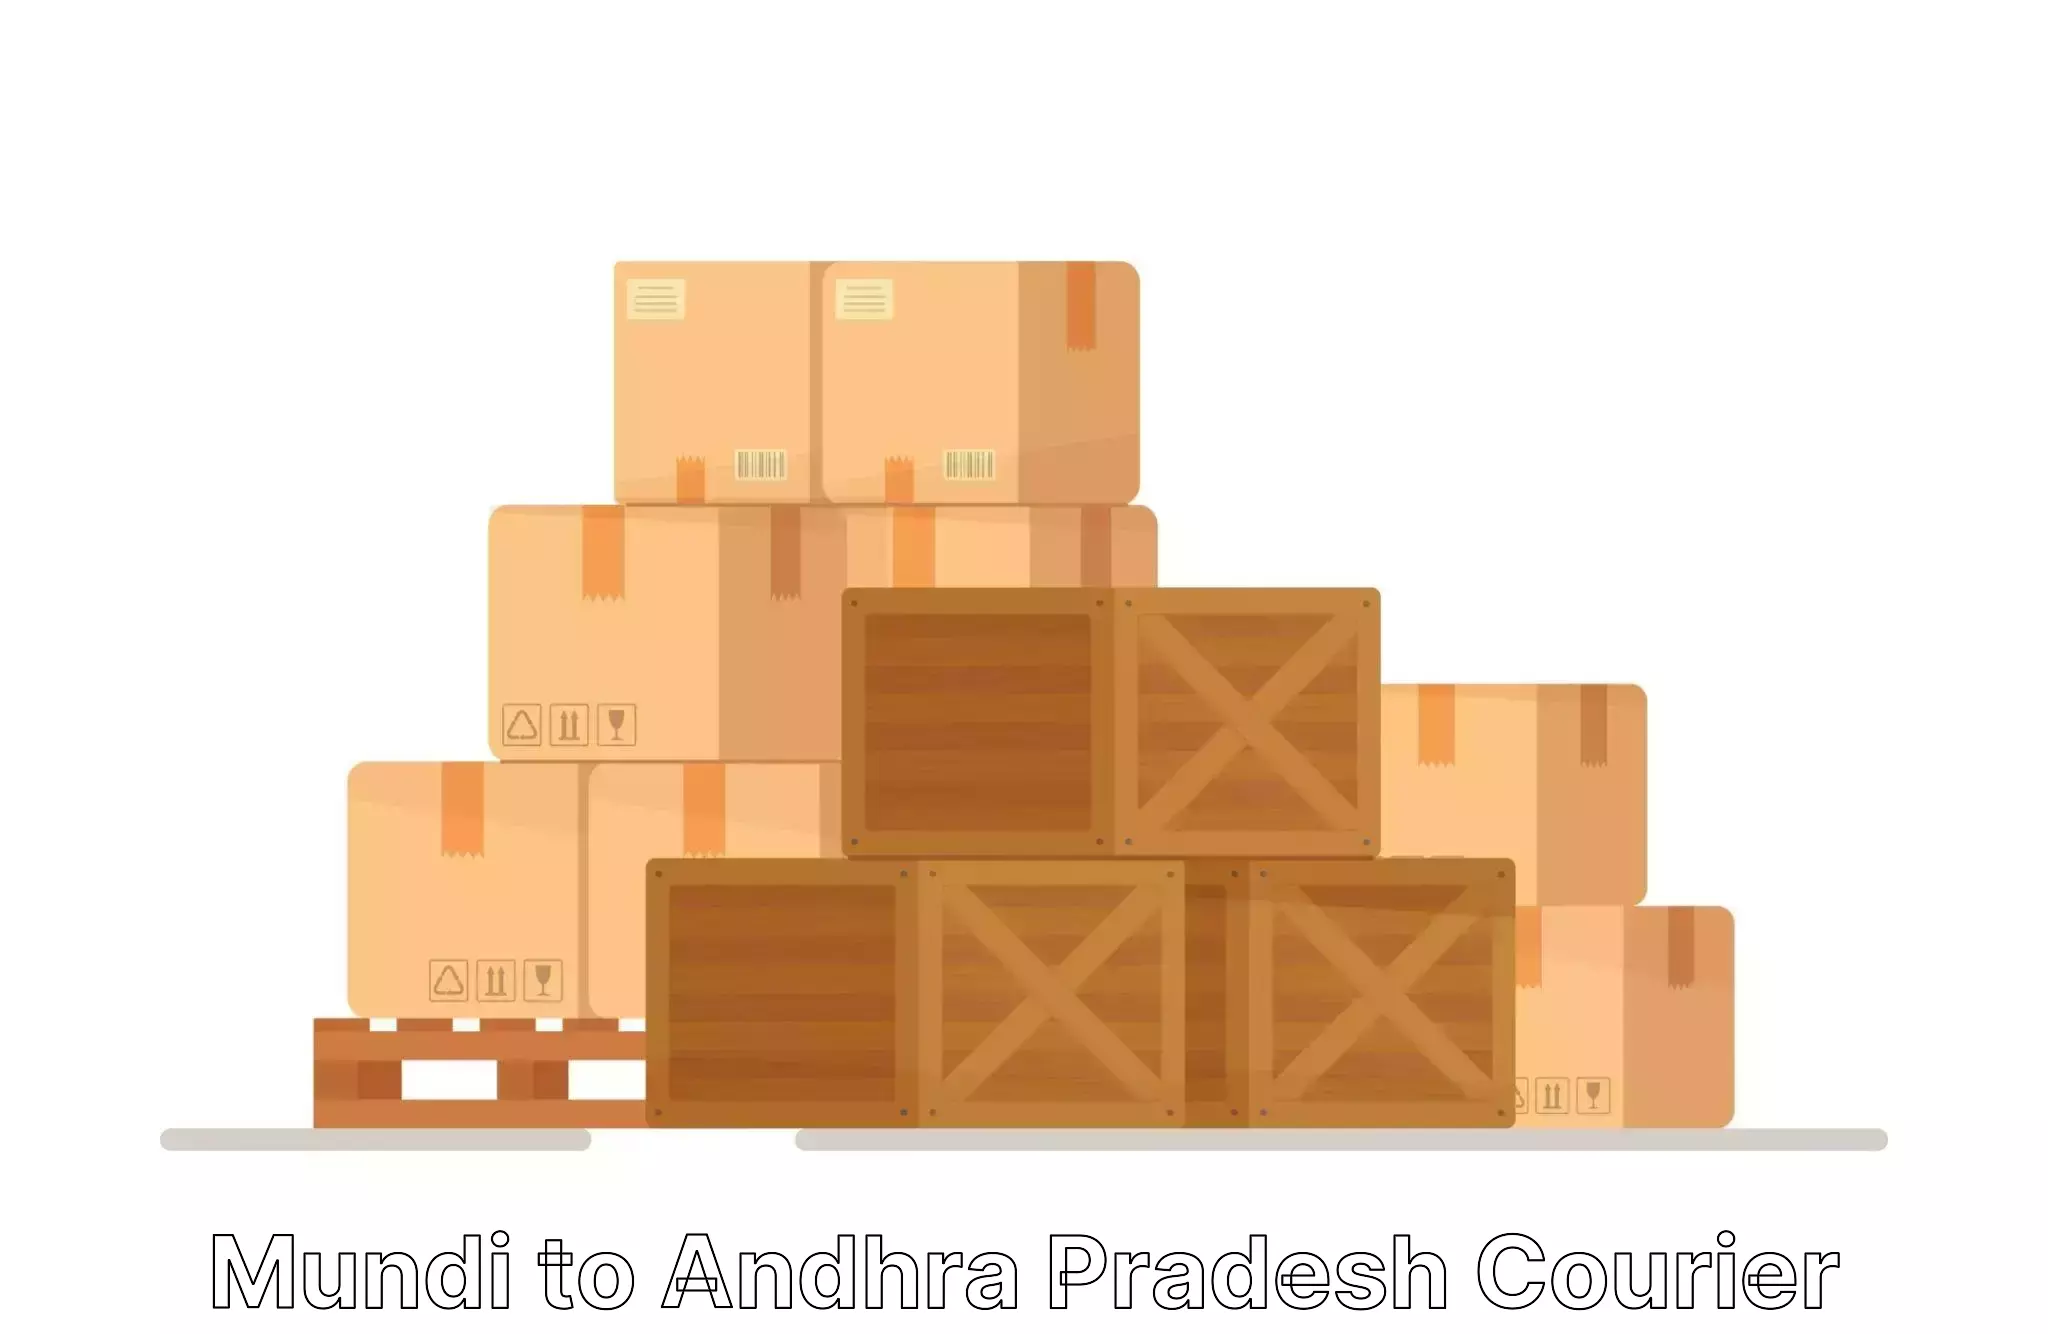 Quality relocation services in Mundi to Andhra Pradesh